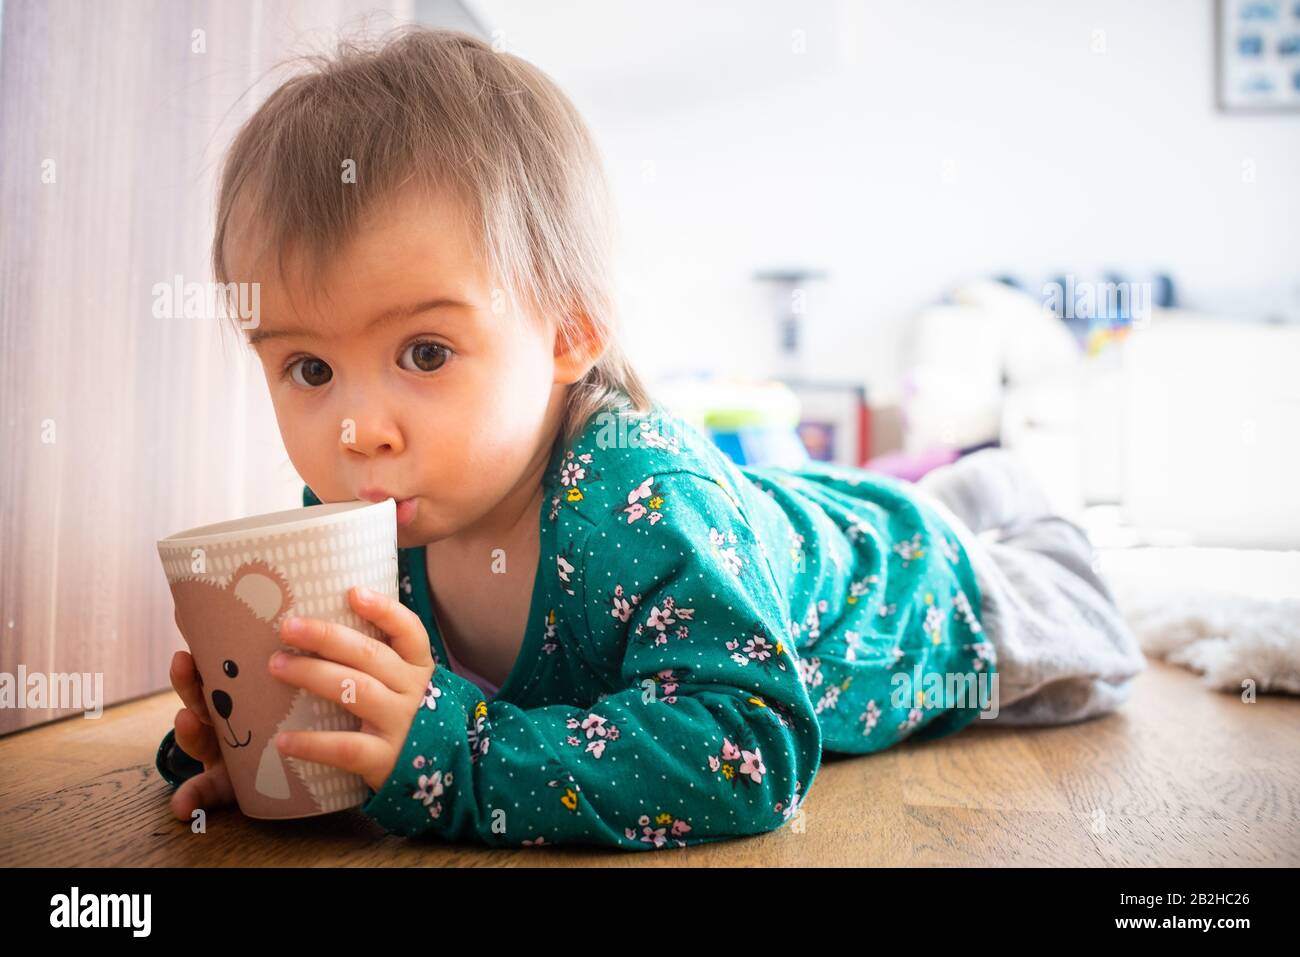 12-15th month old adorable caucasian girl lie on wooden floor with cup in hands. Stock Photo